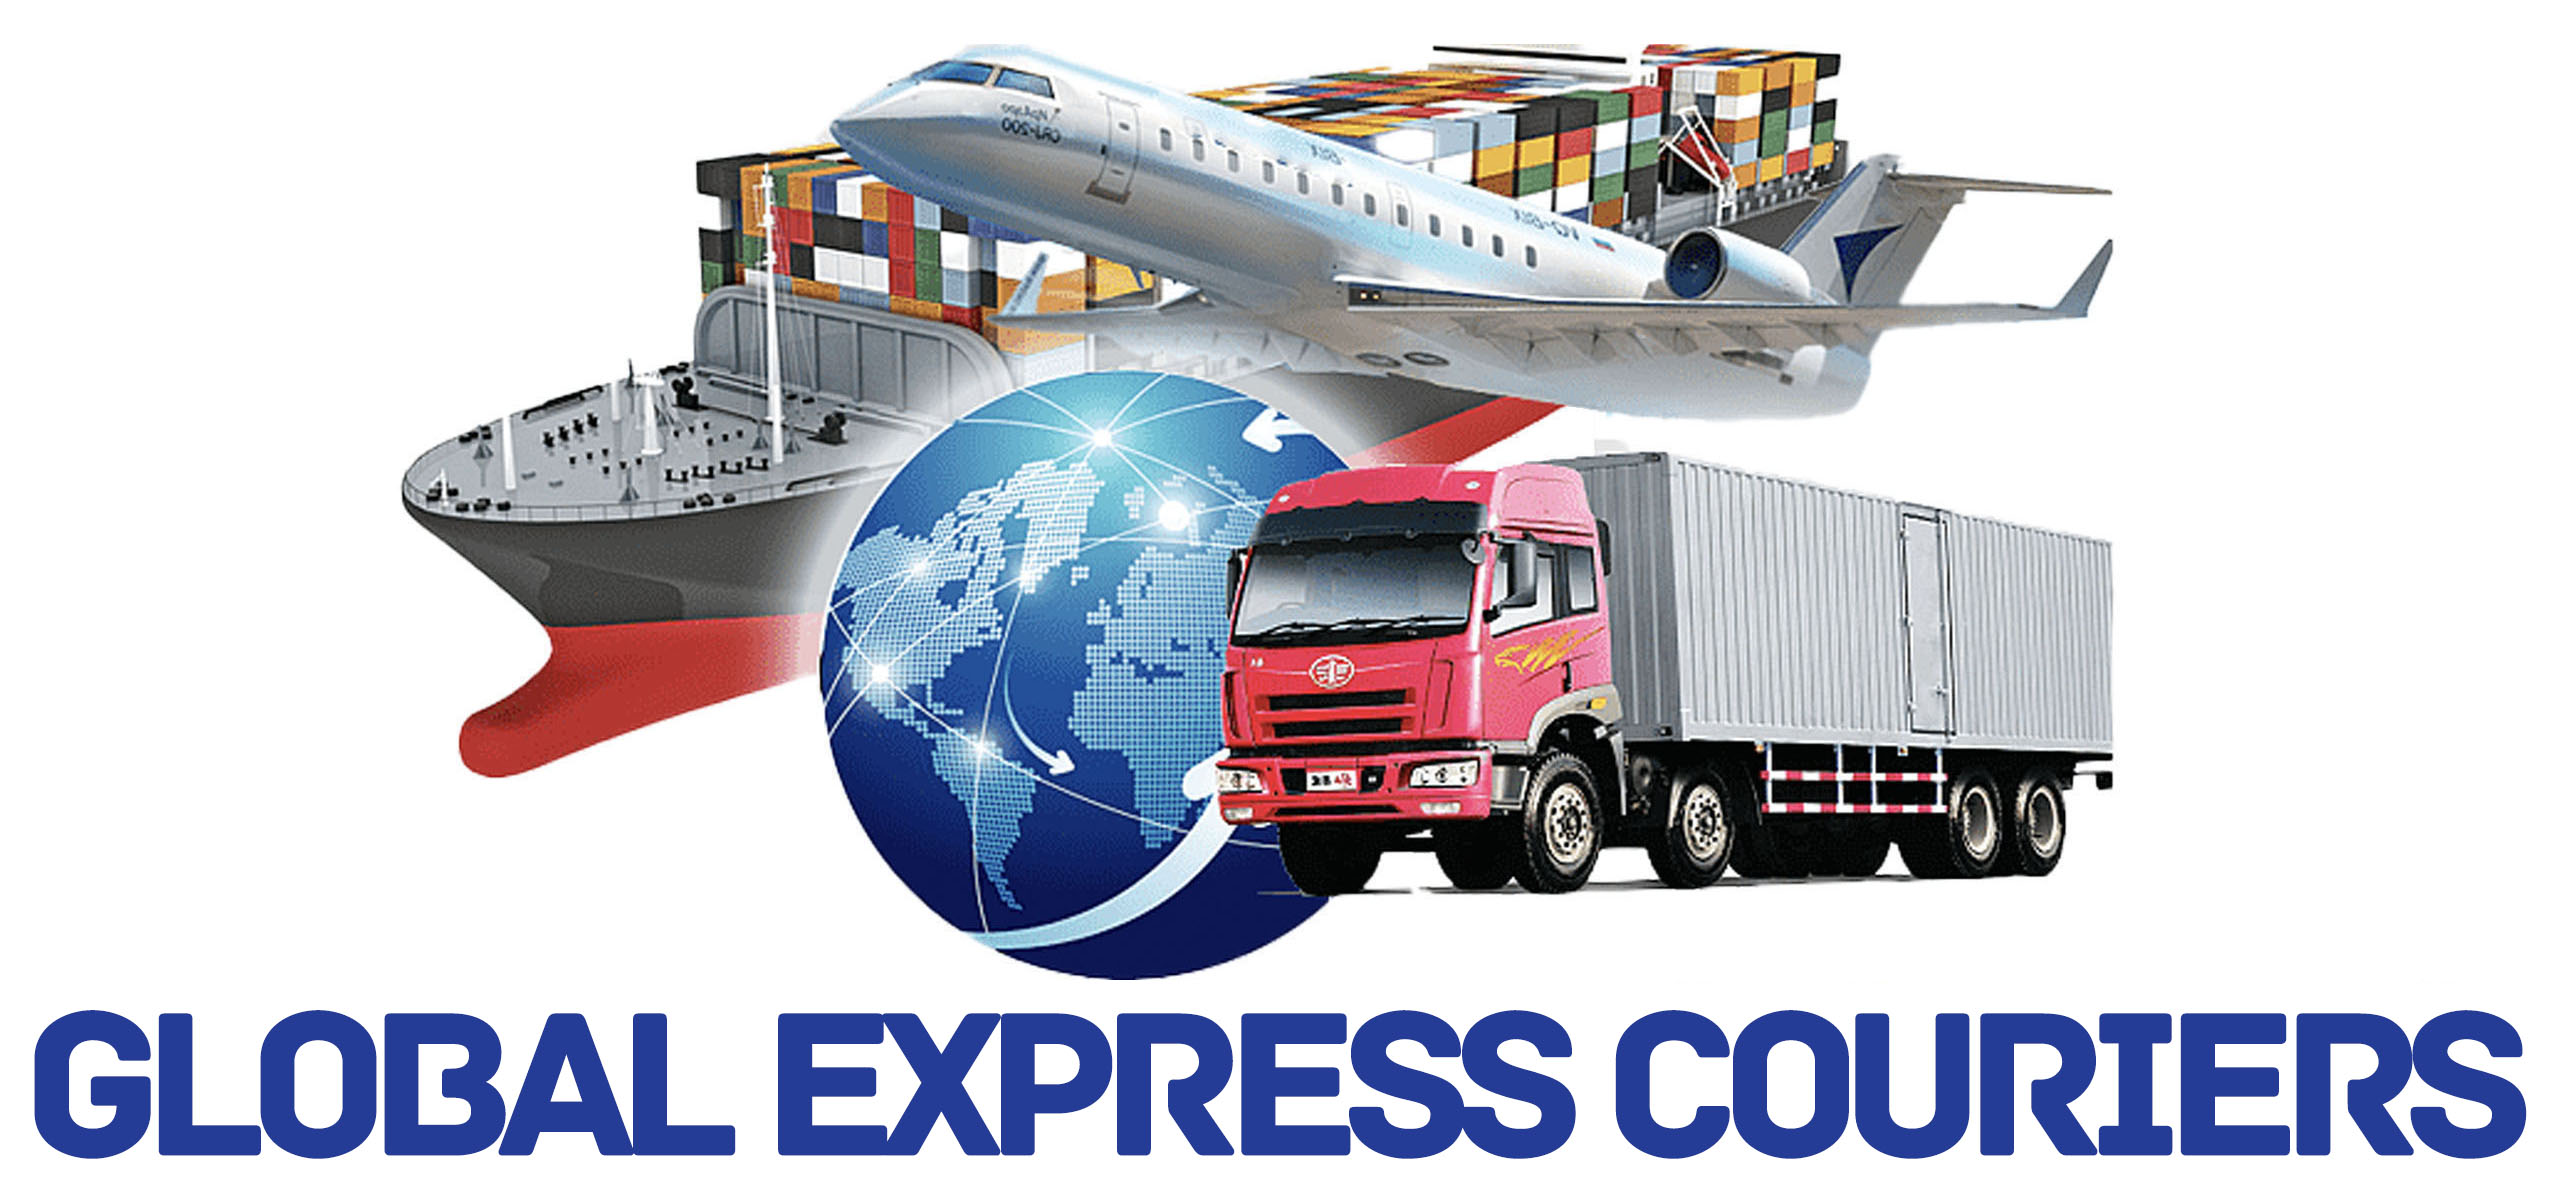 Global Express Couriers